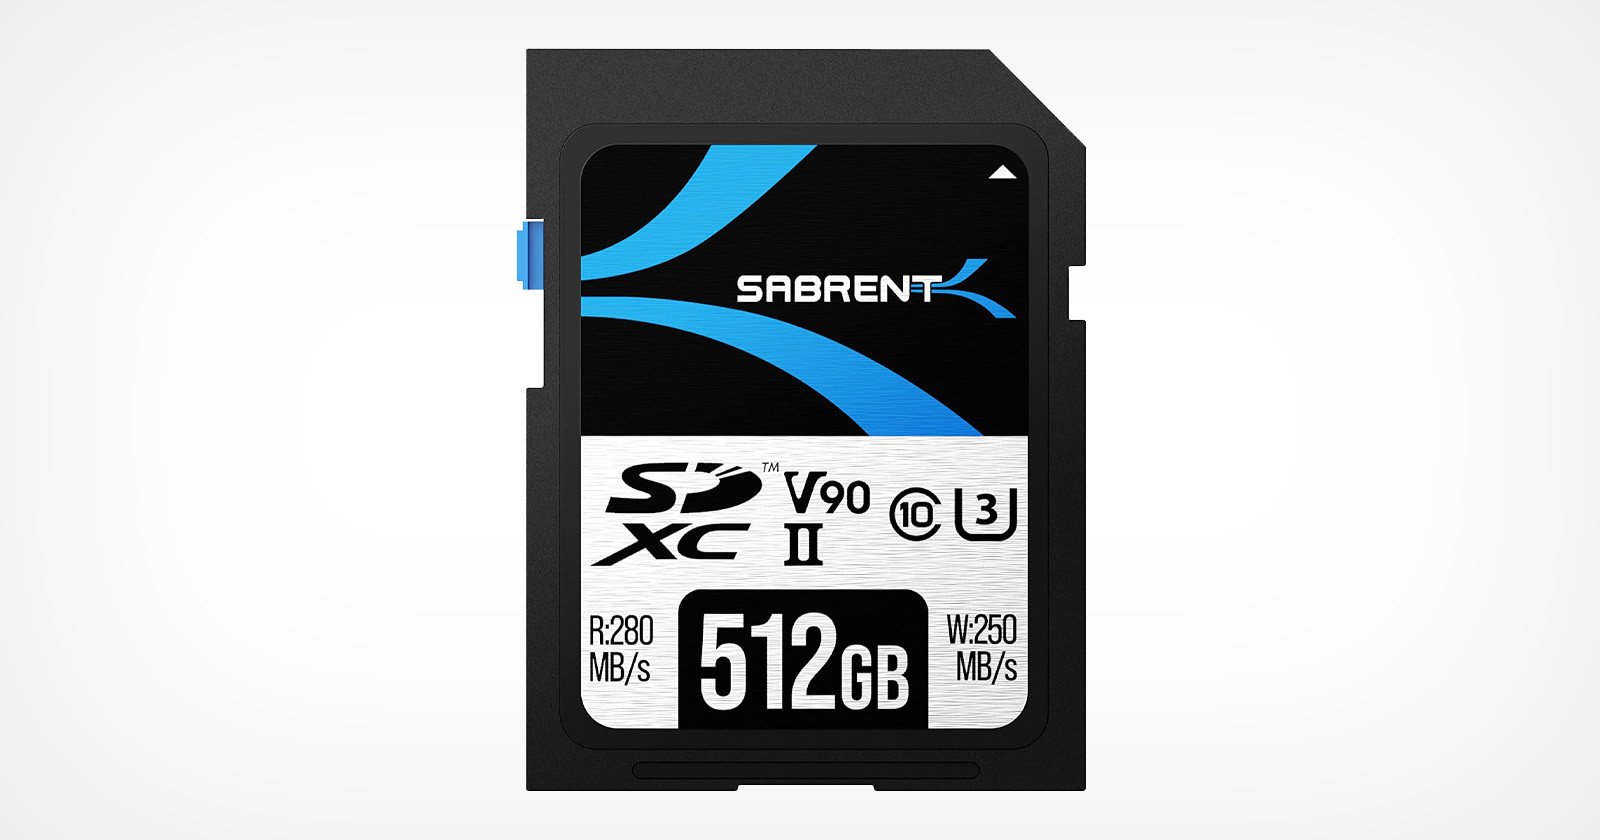 Sabrents 512GB V90 SD Card is $200 Less Than the Only Competitor